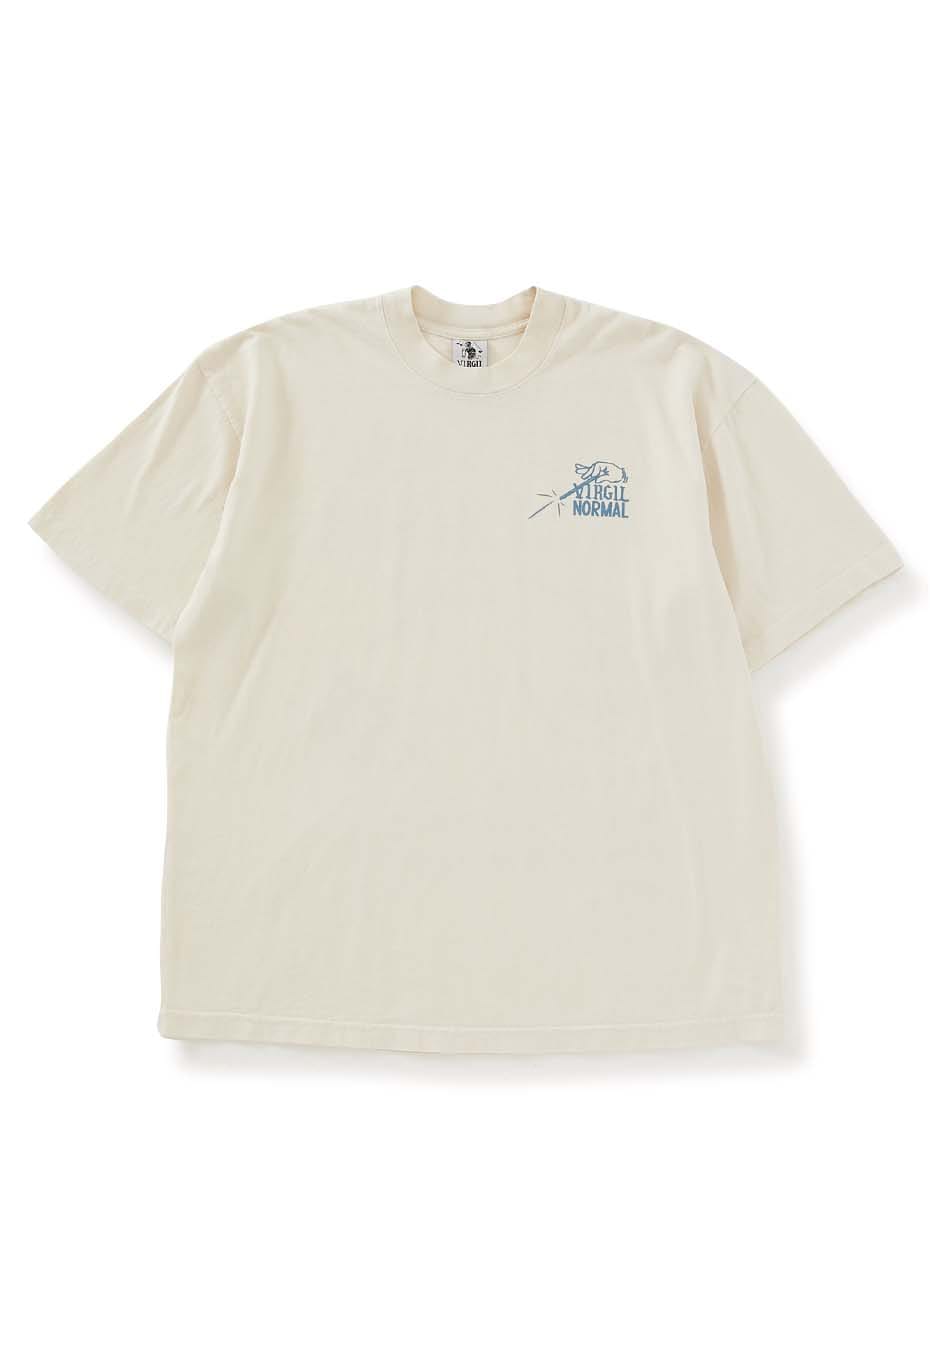 VIRGIL NORMAL SHAPED BY YOU Tシャツ